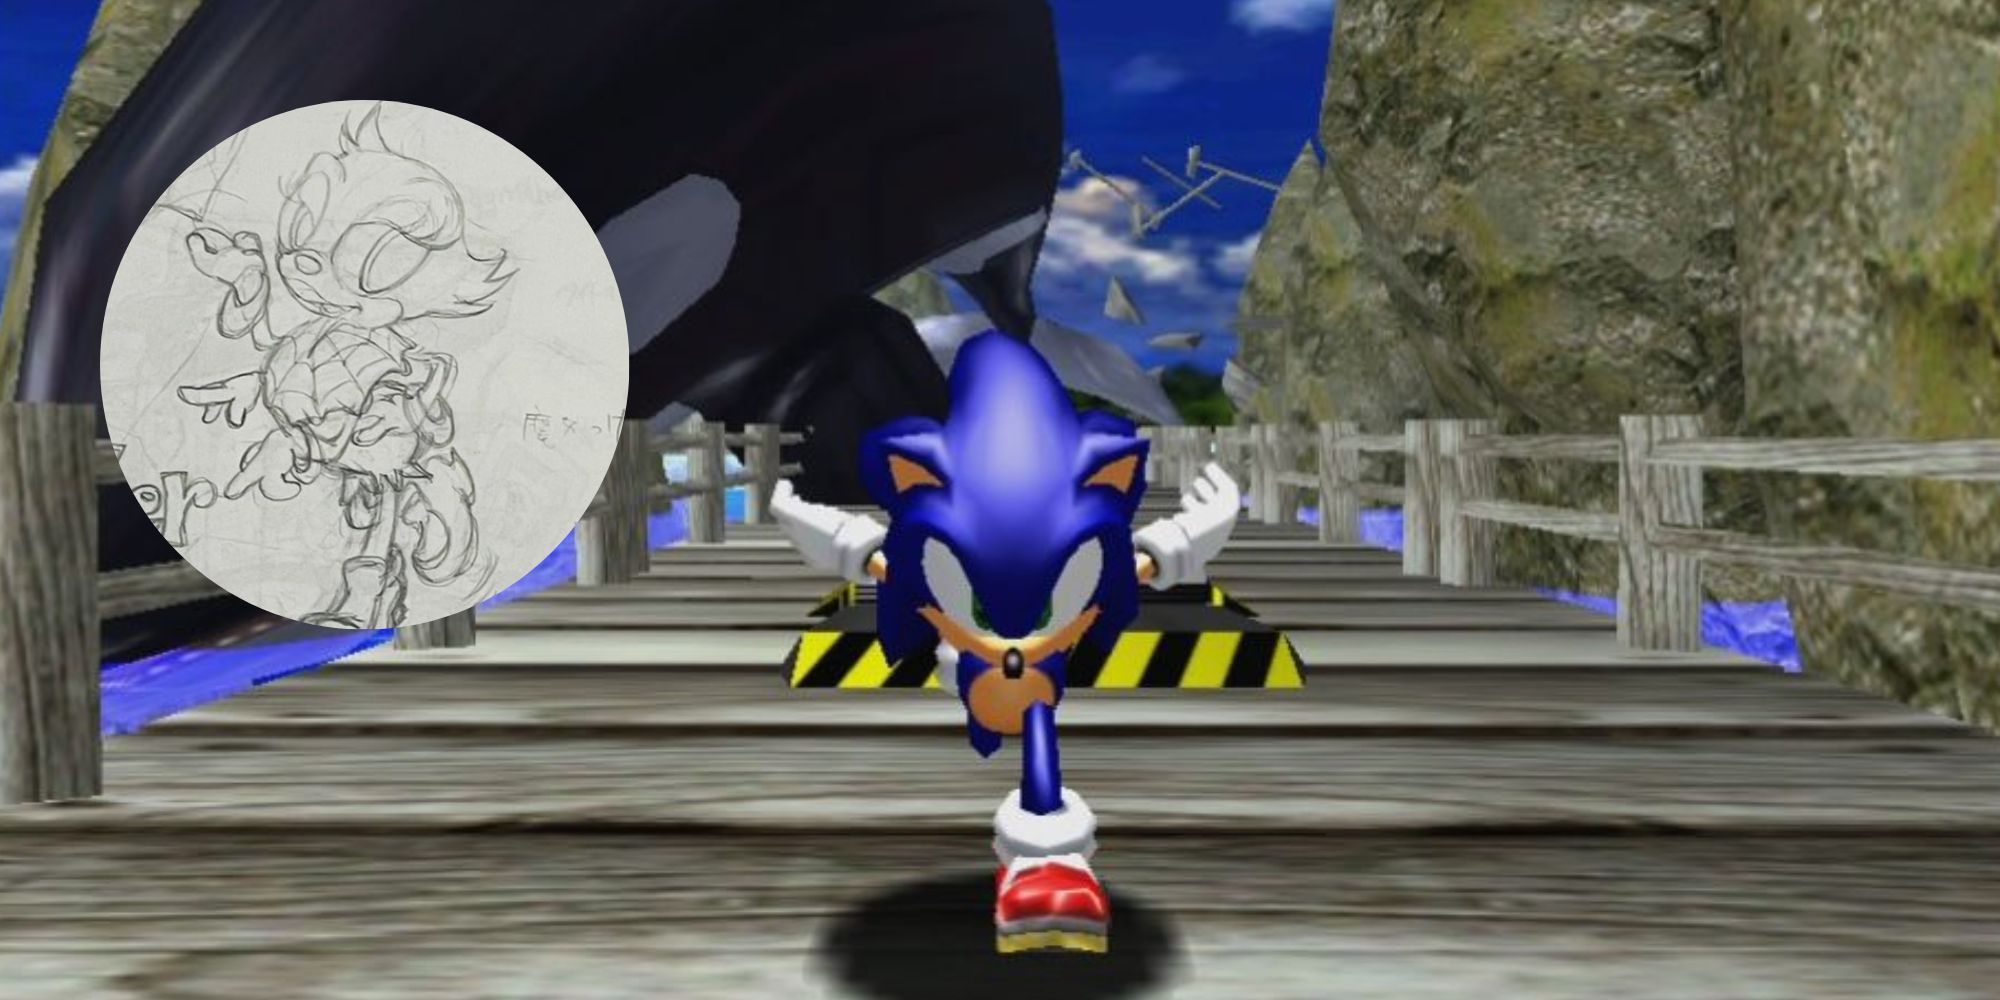 The main image is Sonic running towards the camera, away from a whale. In the top left corner, there's an image of some concept art of a cut character, called Spider Girl